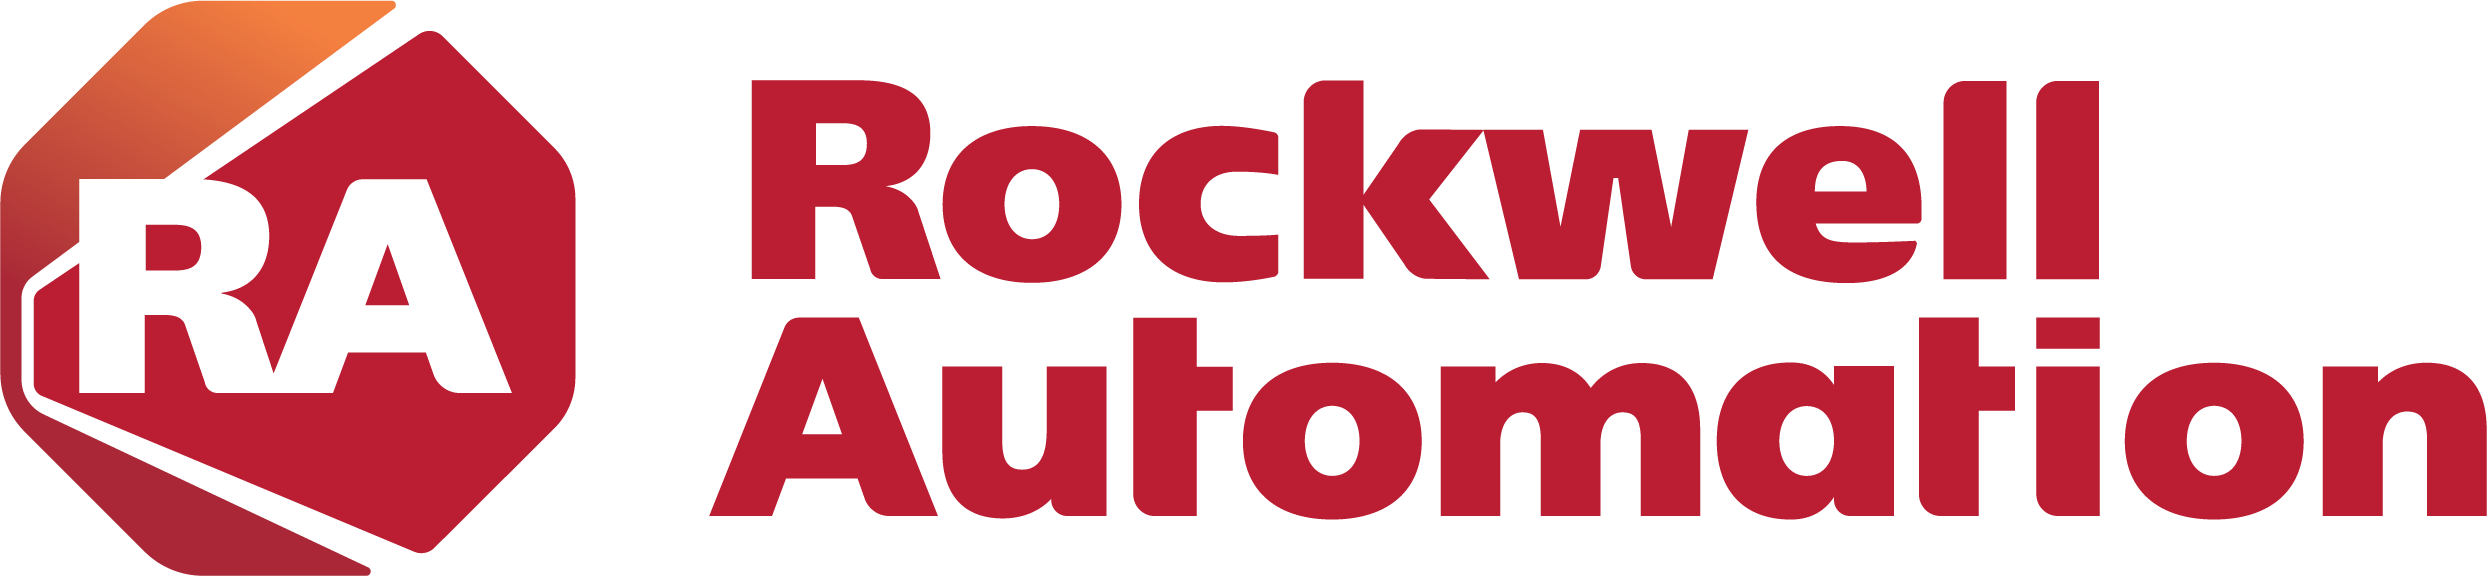 7. Rockwell Automation